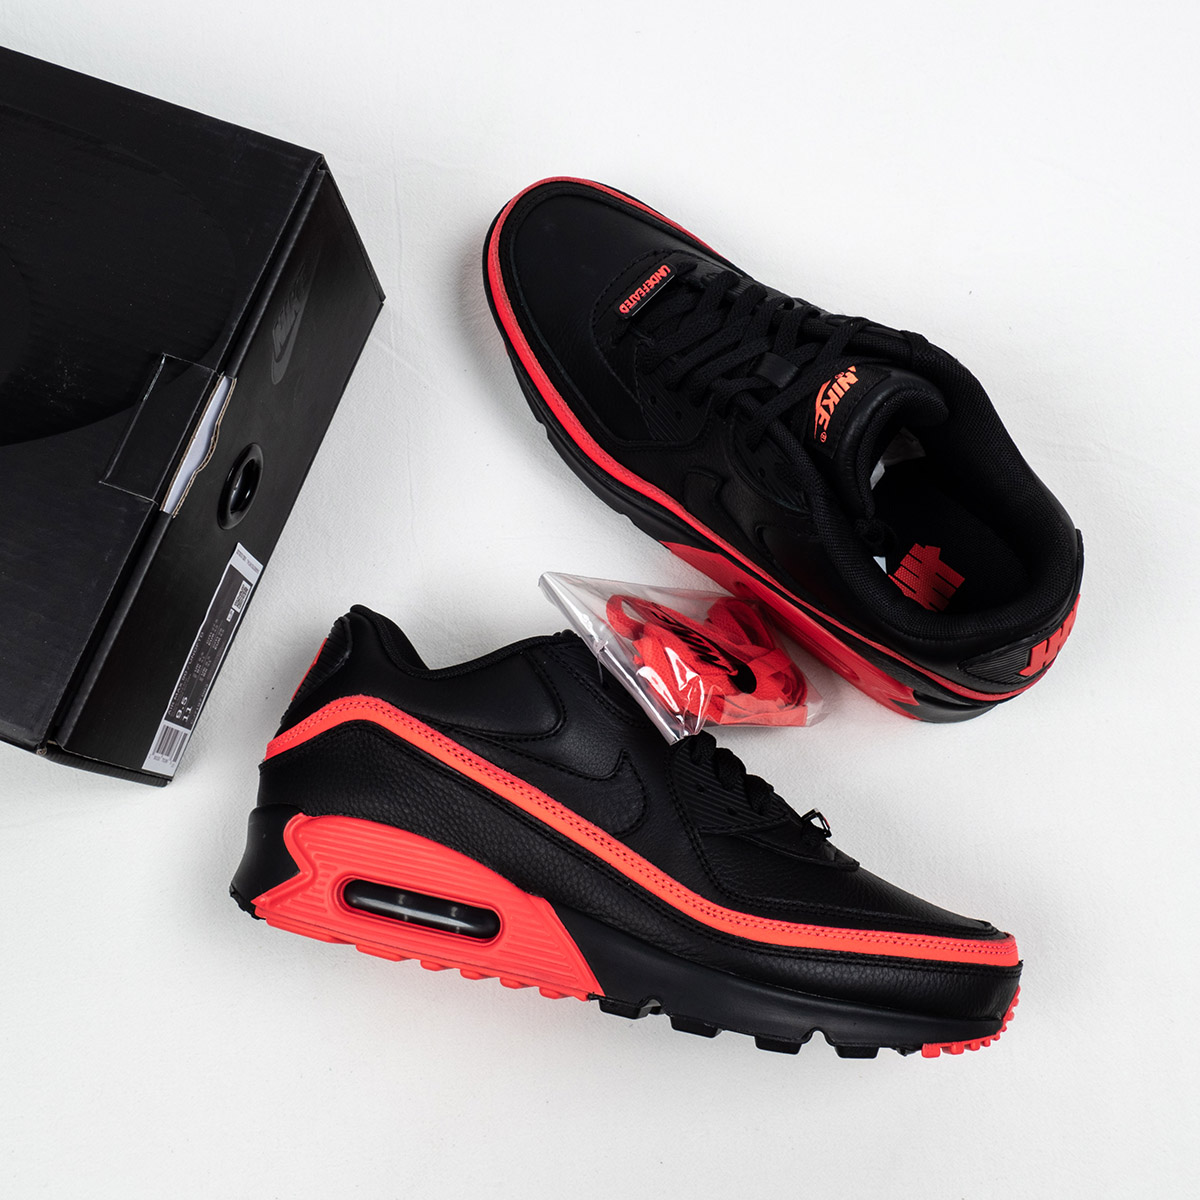 Undefeated x Nike Air Max 90 Black/Solar Red Shoes